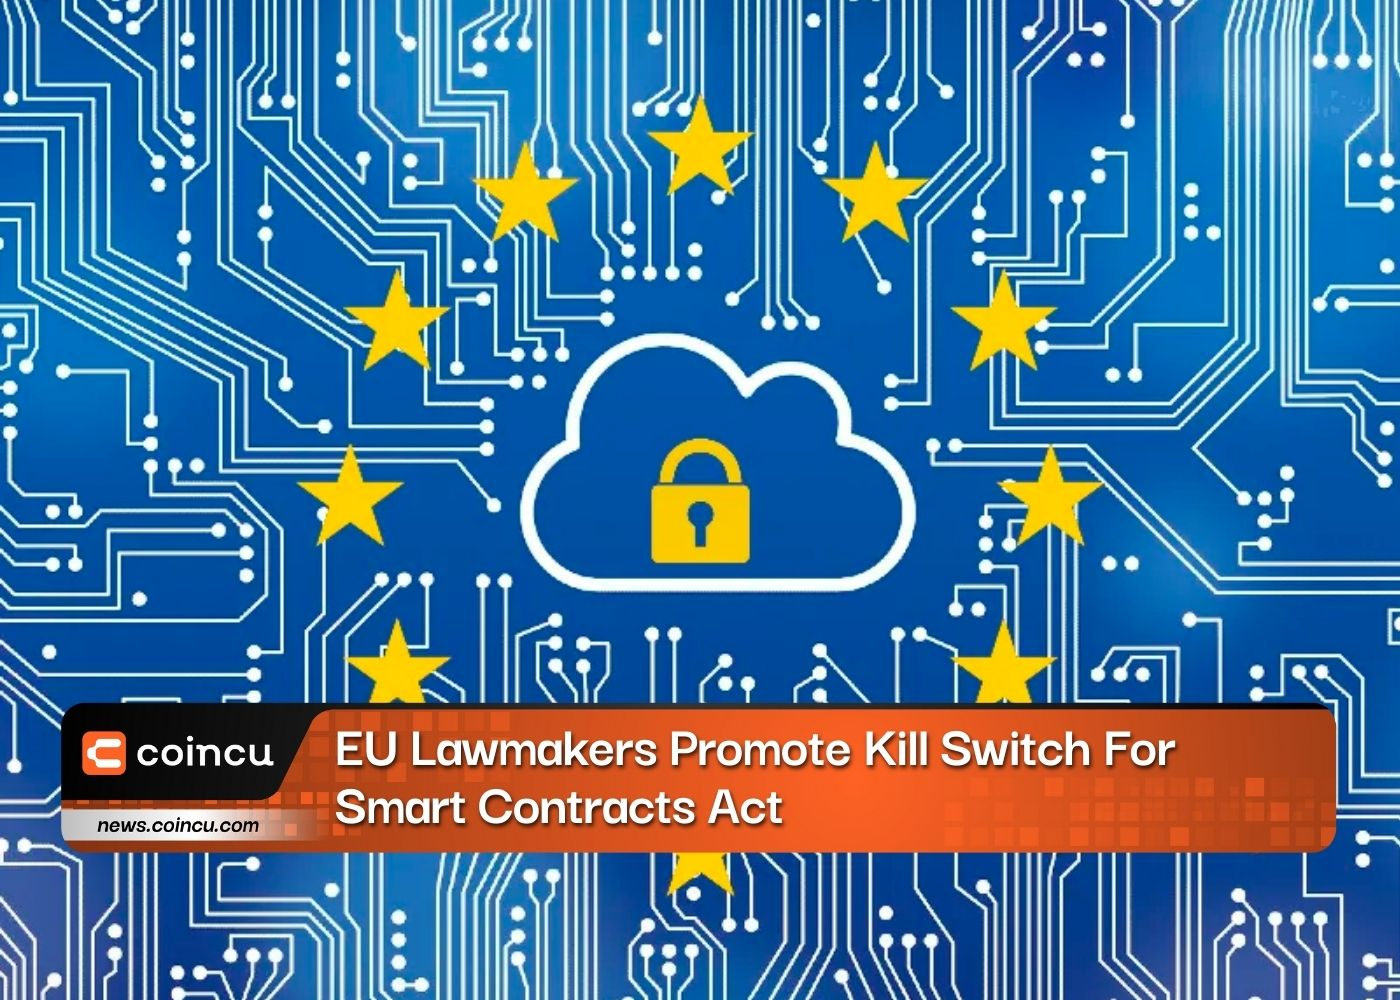 European Lawmakers Promote Kill Switch For Smart Contracts Act